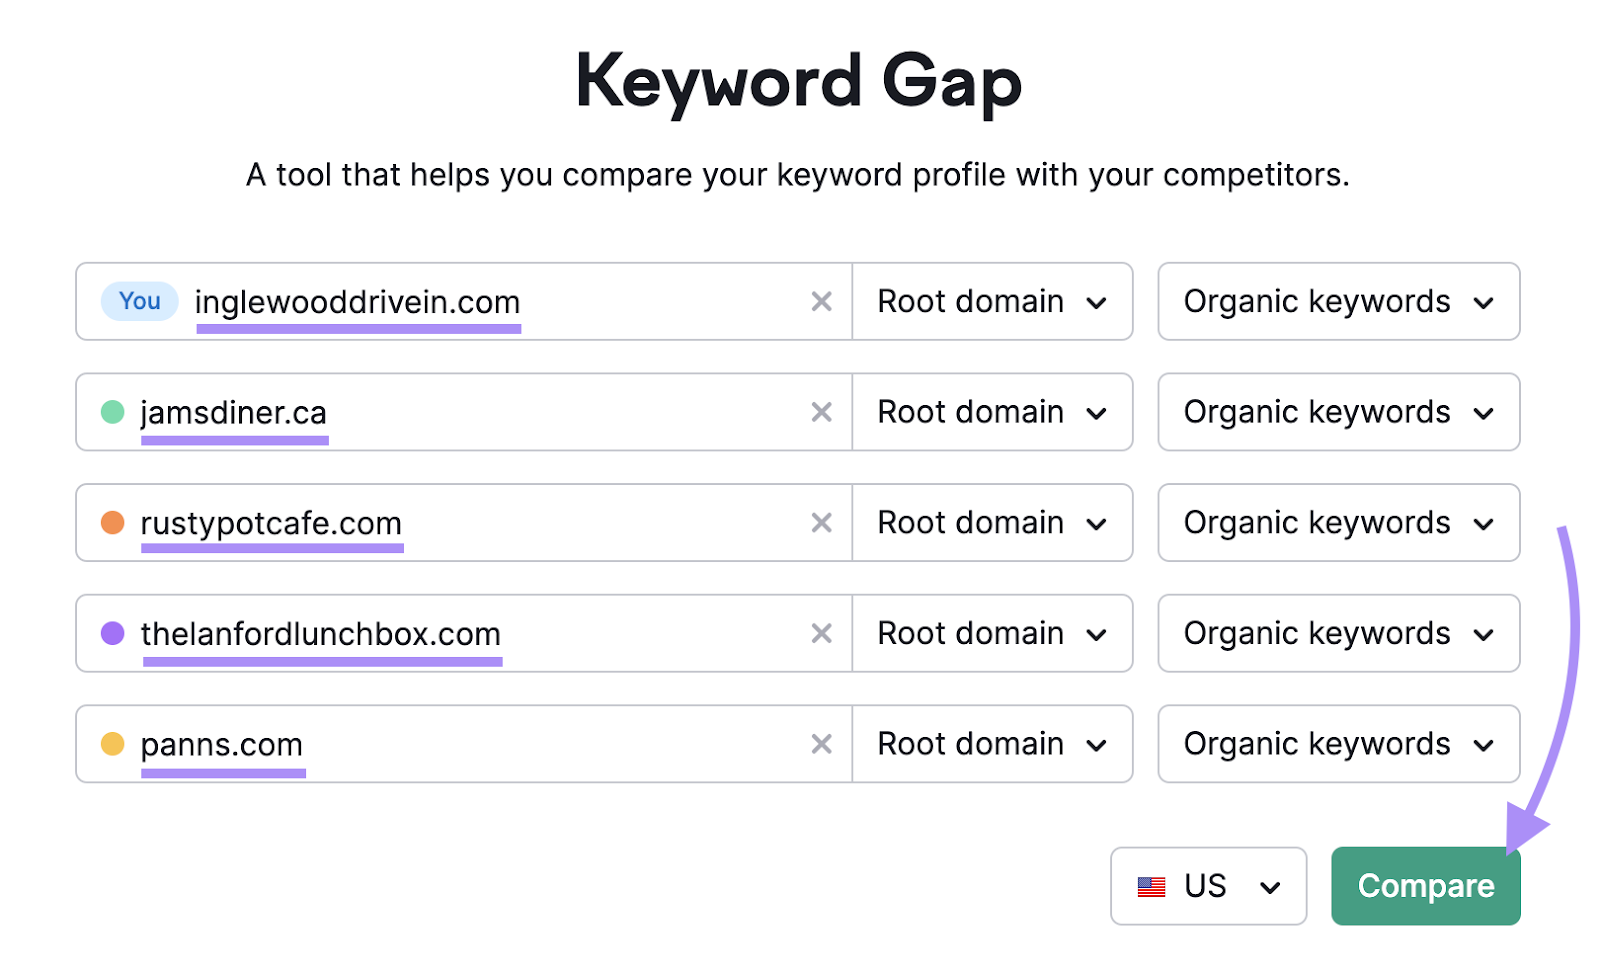 "inglewooddrivein.com" and competitors domains entered into the Keyword Gap tool